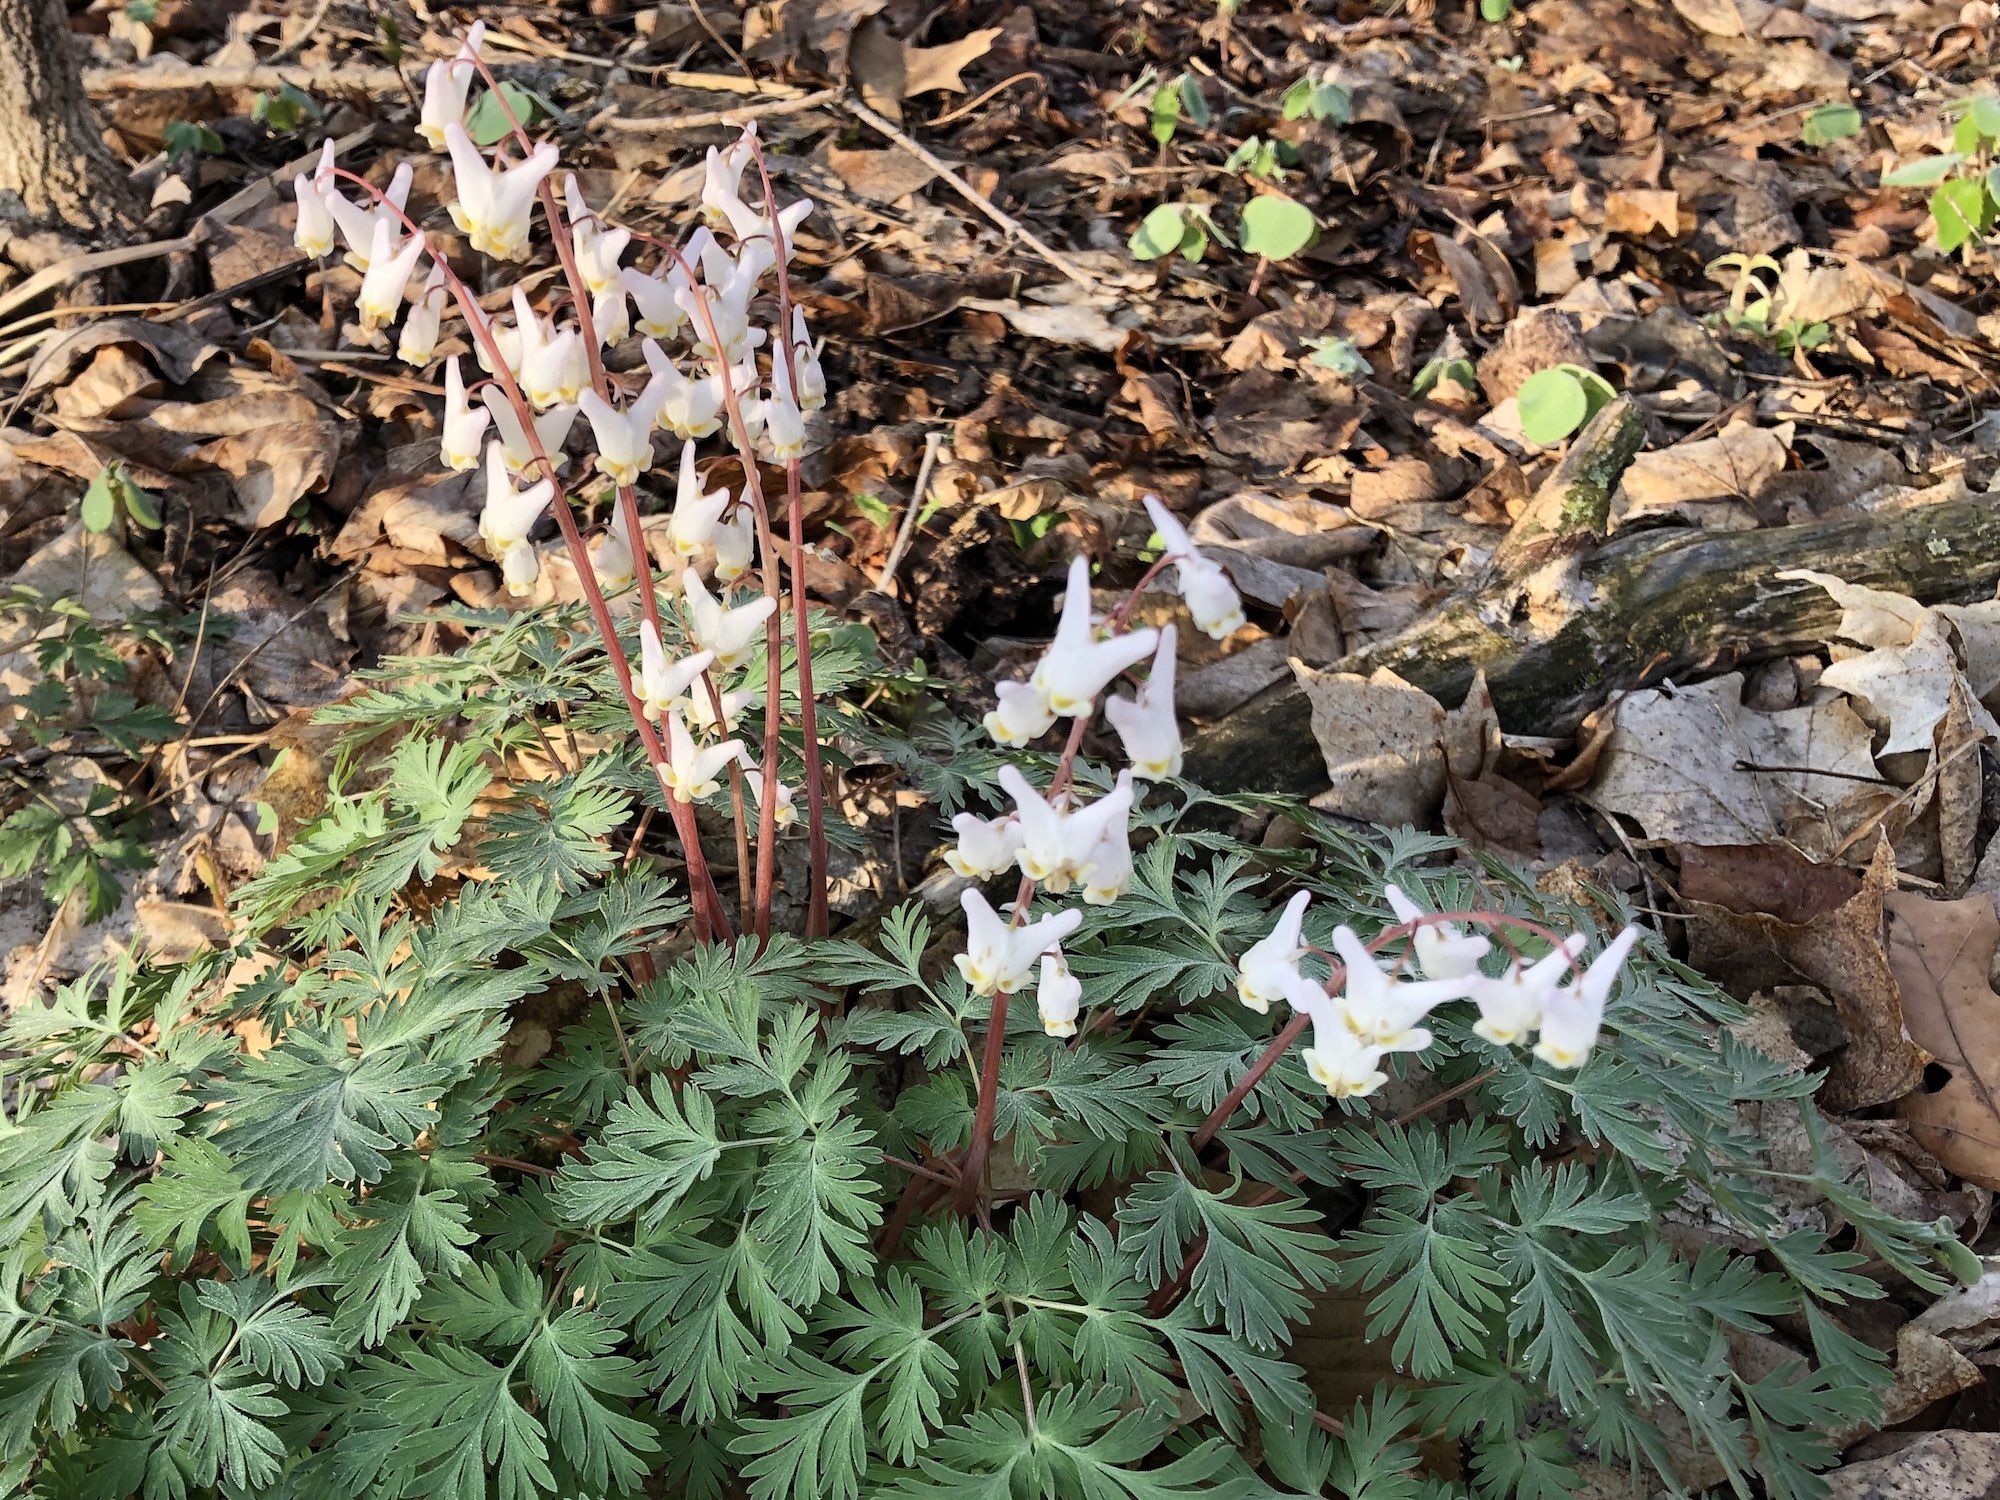 Dutchman's Breeches in woods between Oak Savanna and Marion Dunn on April 24, 2019.